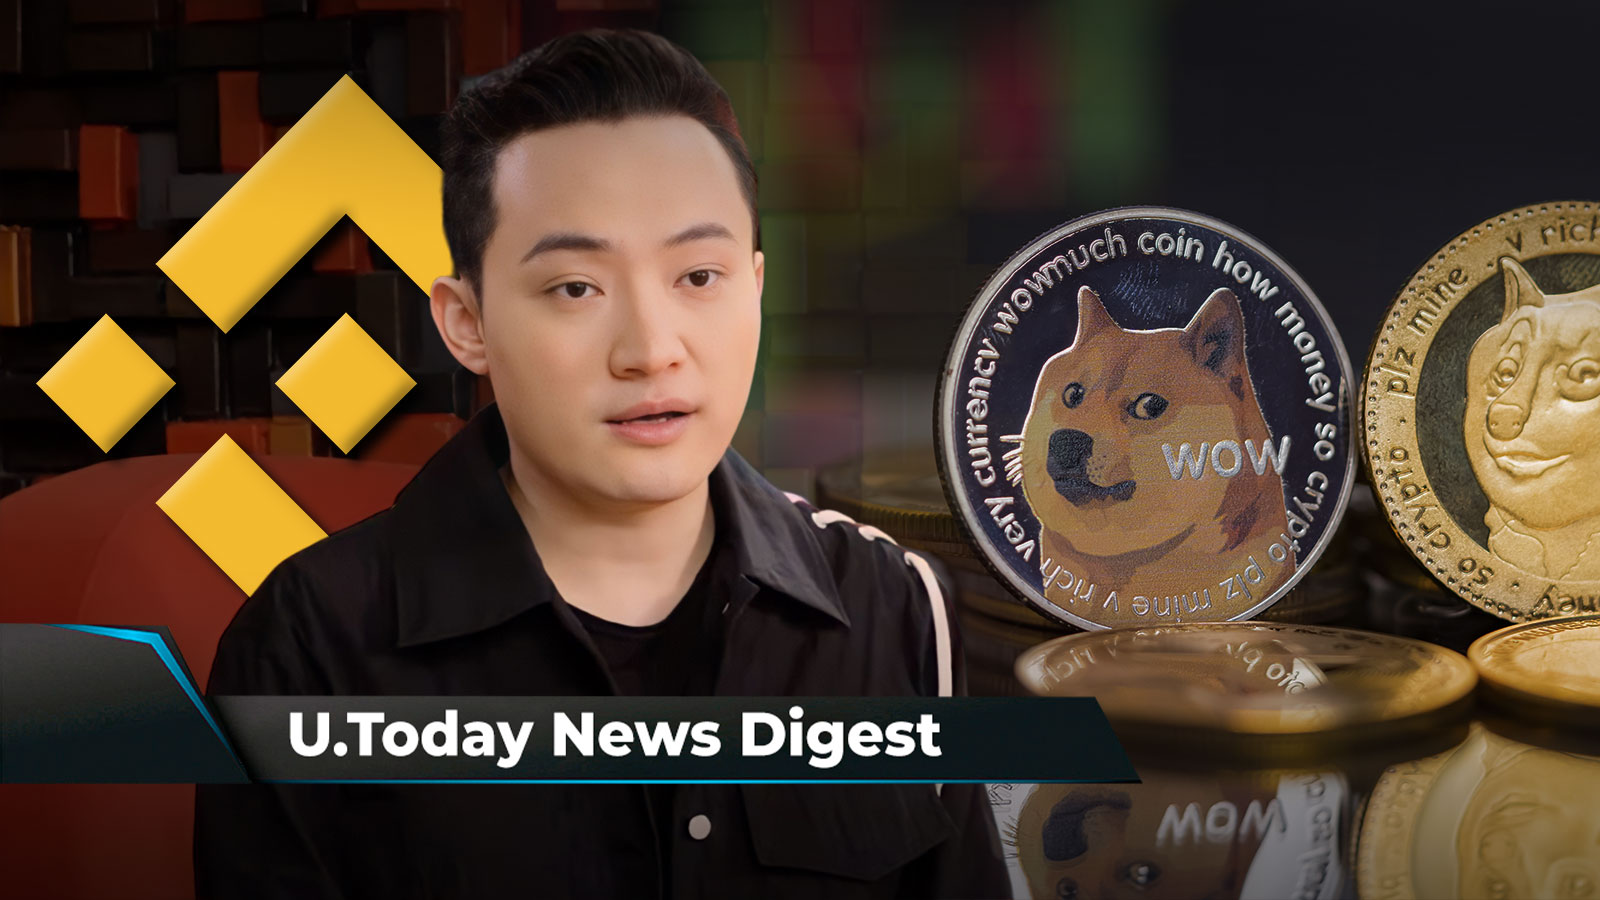 Justin Sun Moves $50 Million to Binance to Support ETH, Ripple CTO Declares NFT Revolution on XRP Ledger, DOGE Spiked 115% Last Week: Crypto News Digest by U.Today